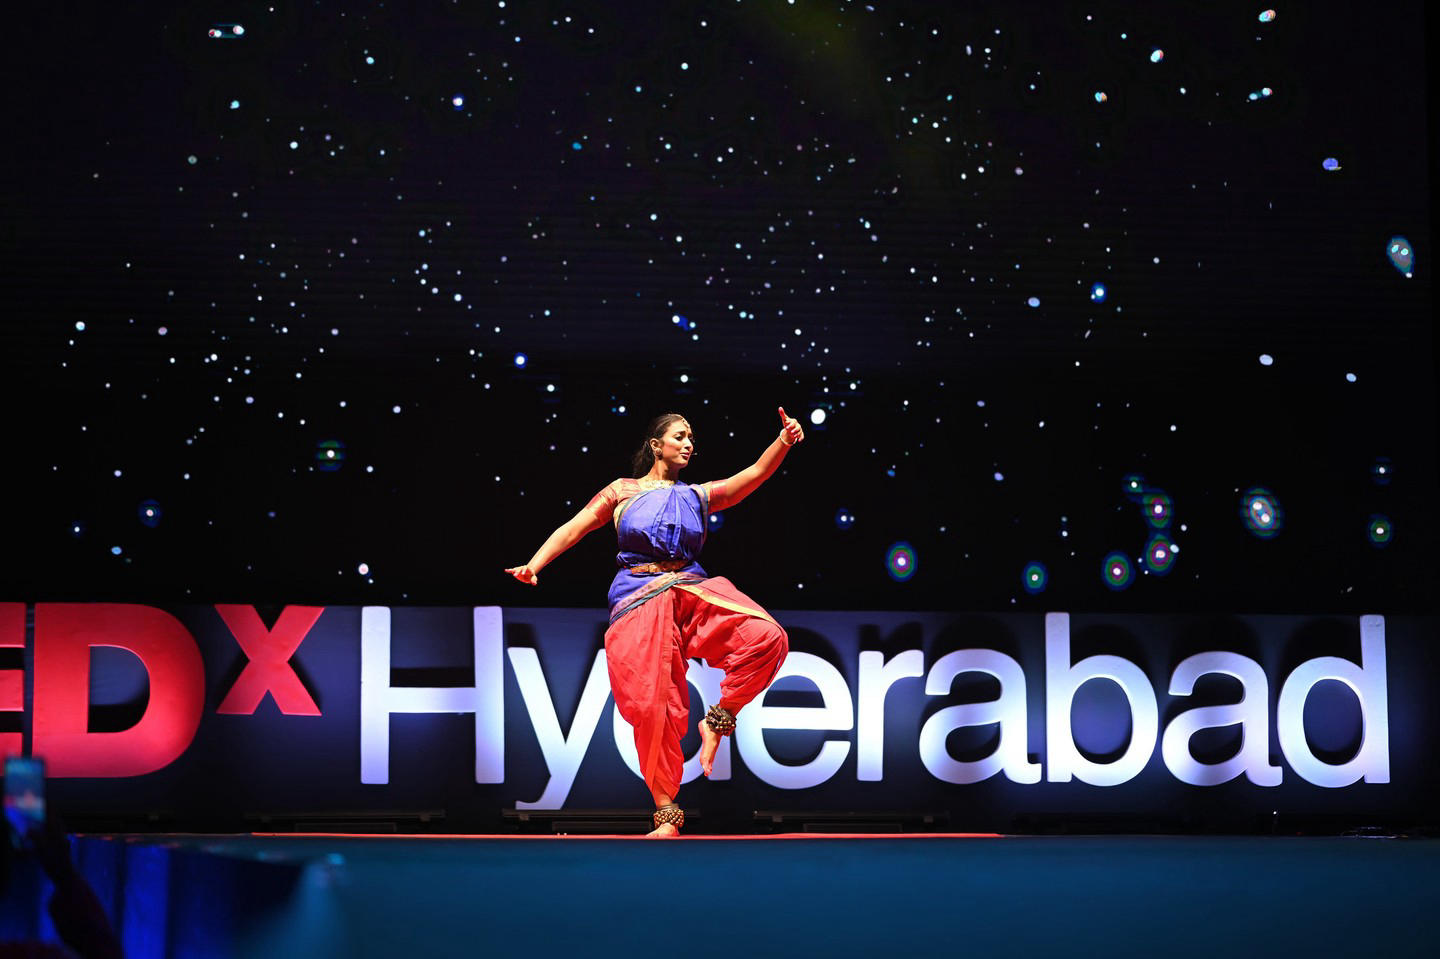 TEDx - In Telangana, India, #tedxhyd crafts a glittering rendezvous for its seventh event